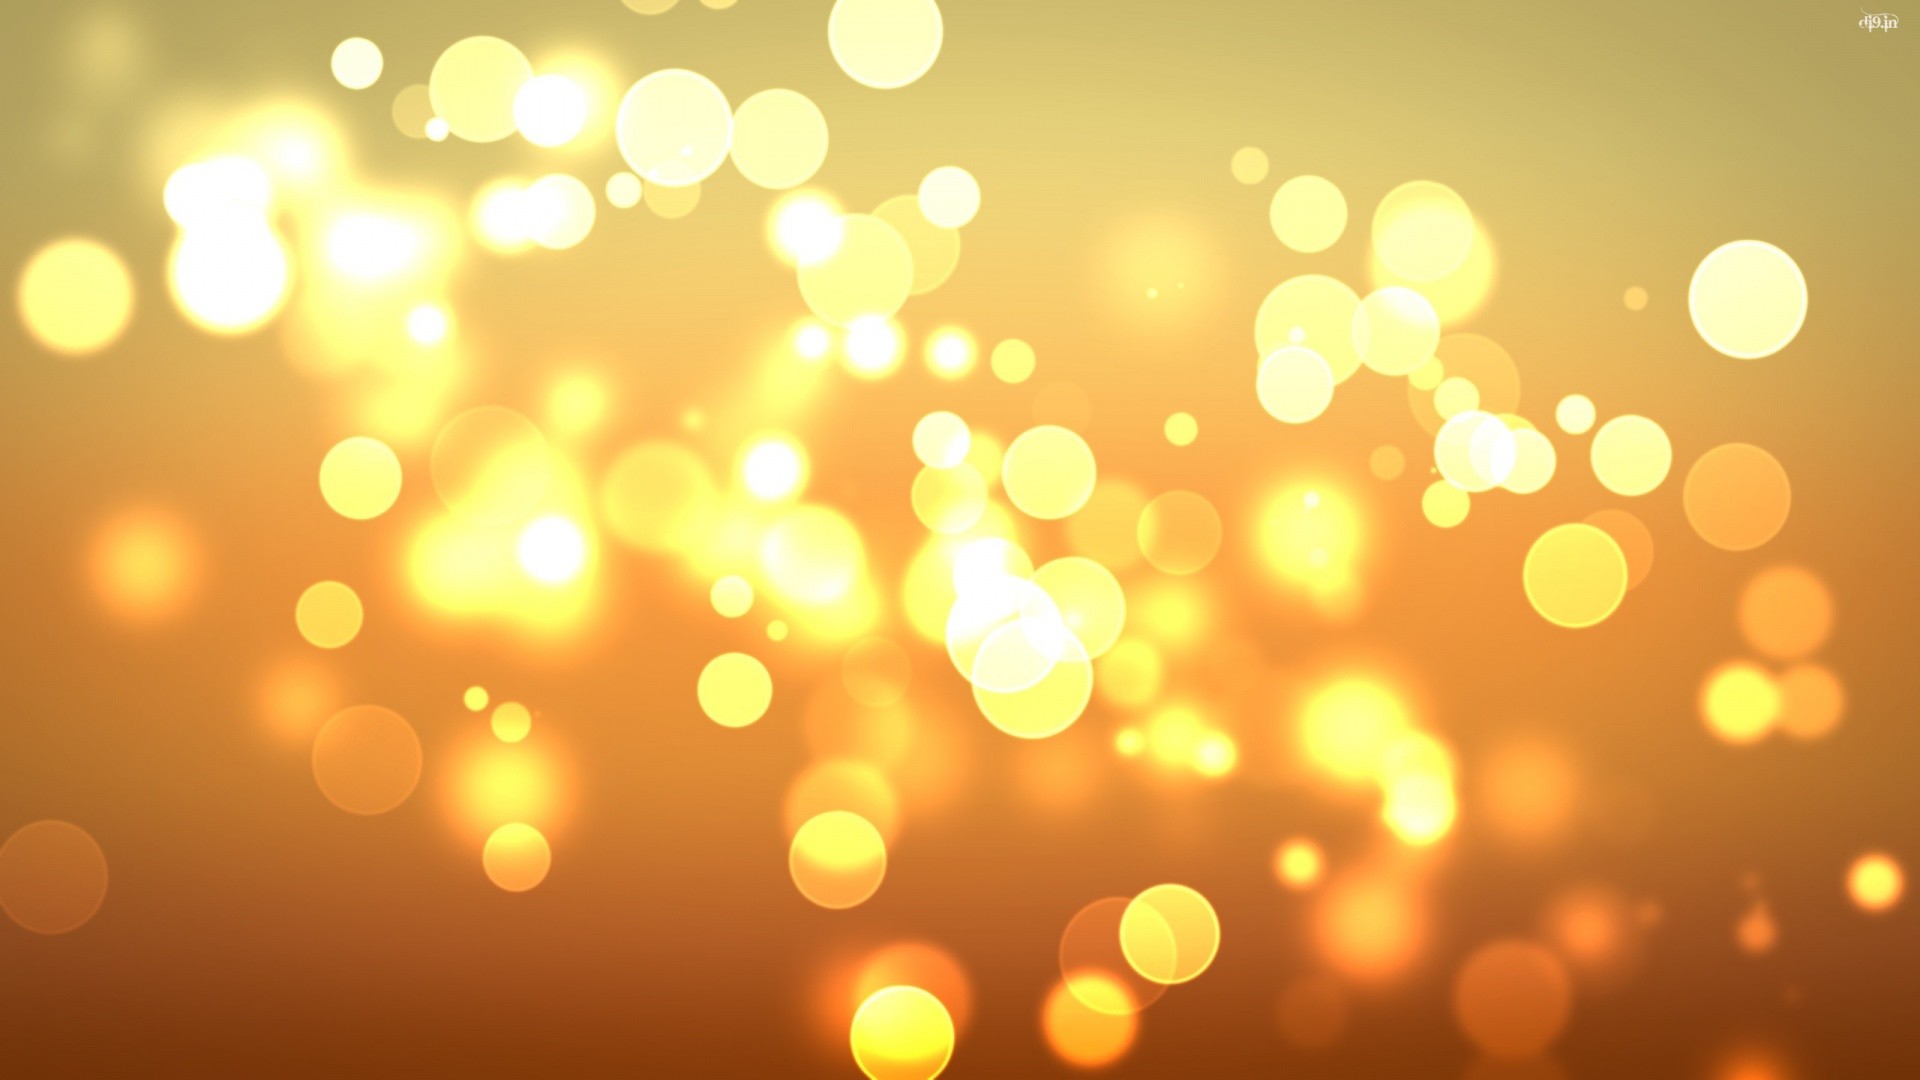 1920x1080 Golden Bubbles Wallpaper And Stock Images 1920X1080 Resolution